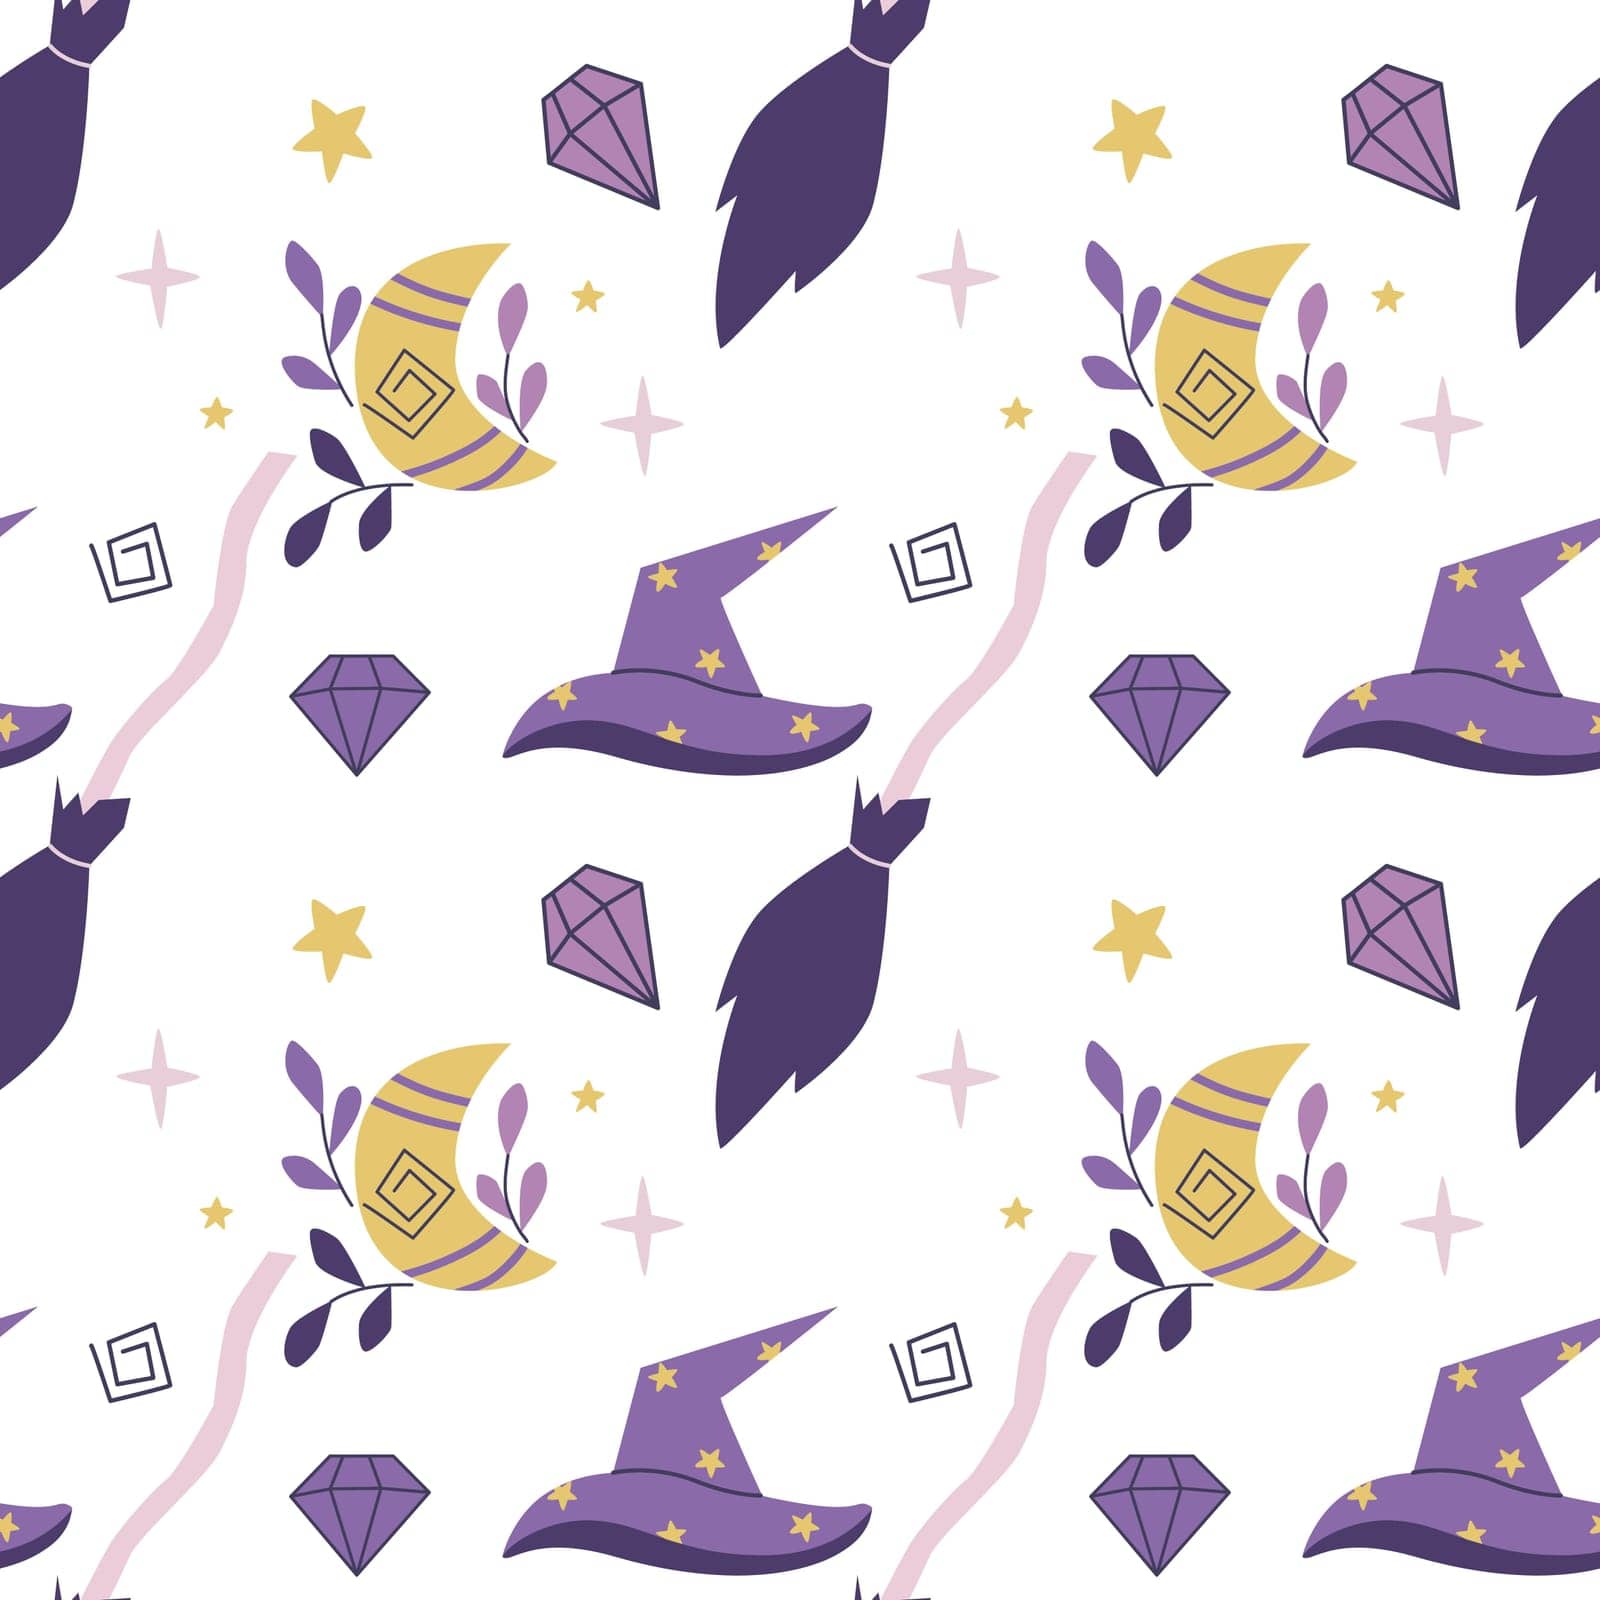 Witch hat and broom magic seamless pattern. Symbols of witchcraft and wizardry background. Hand drawn moon, crystals, magic hat and stars, print for textile, paper, packaging and design, vector illustration